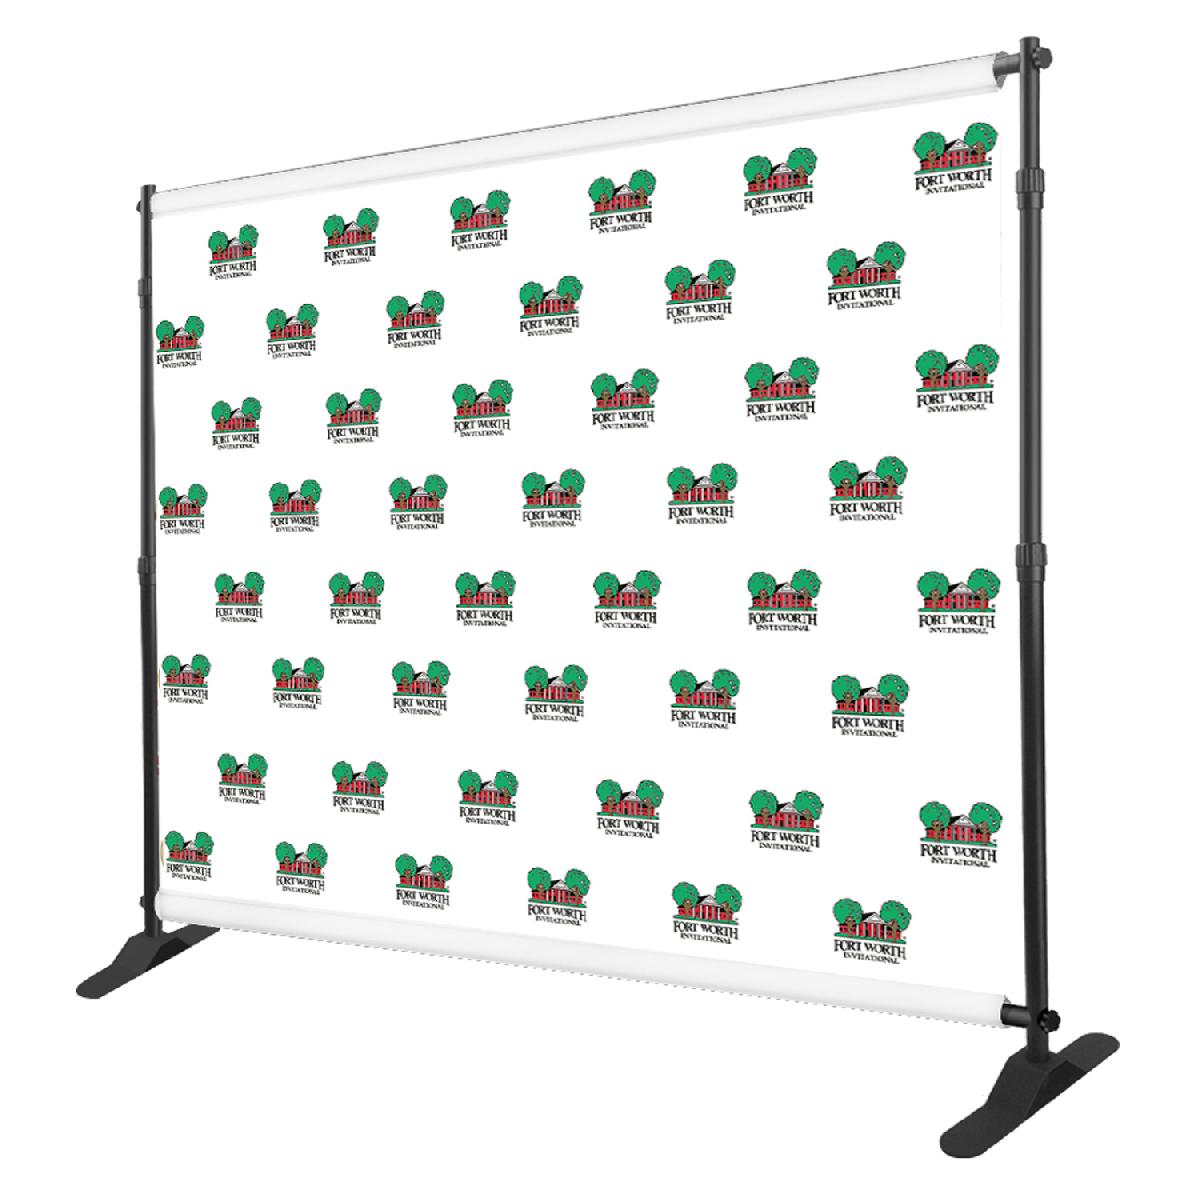 10' x 8' Step And Repeat Backdrop Stand 